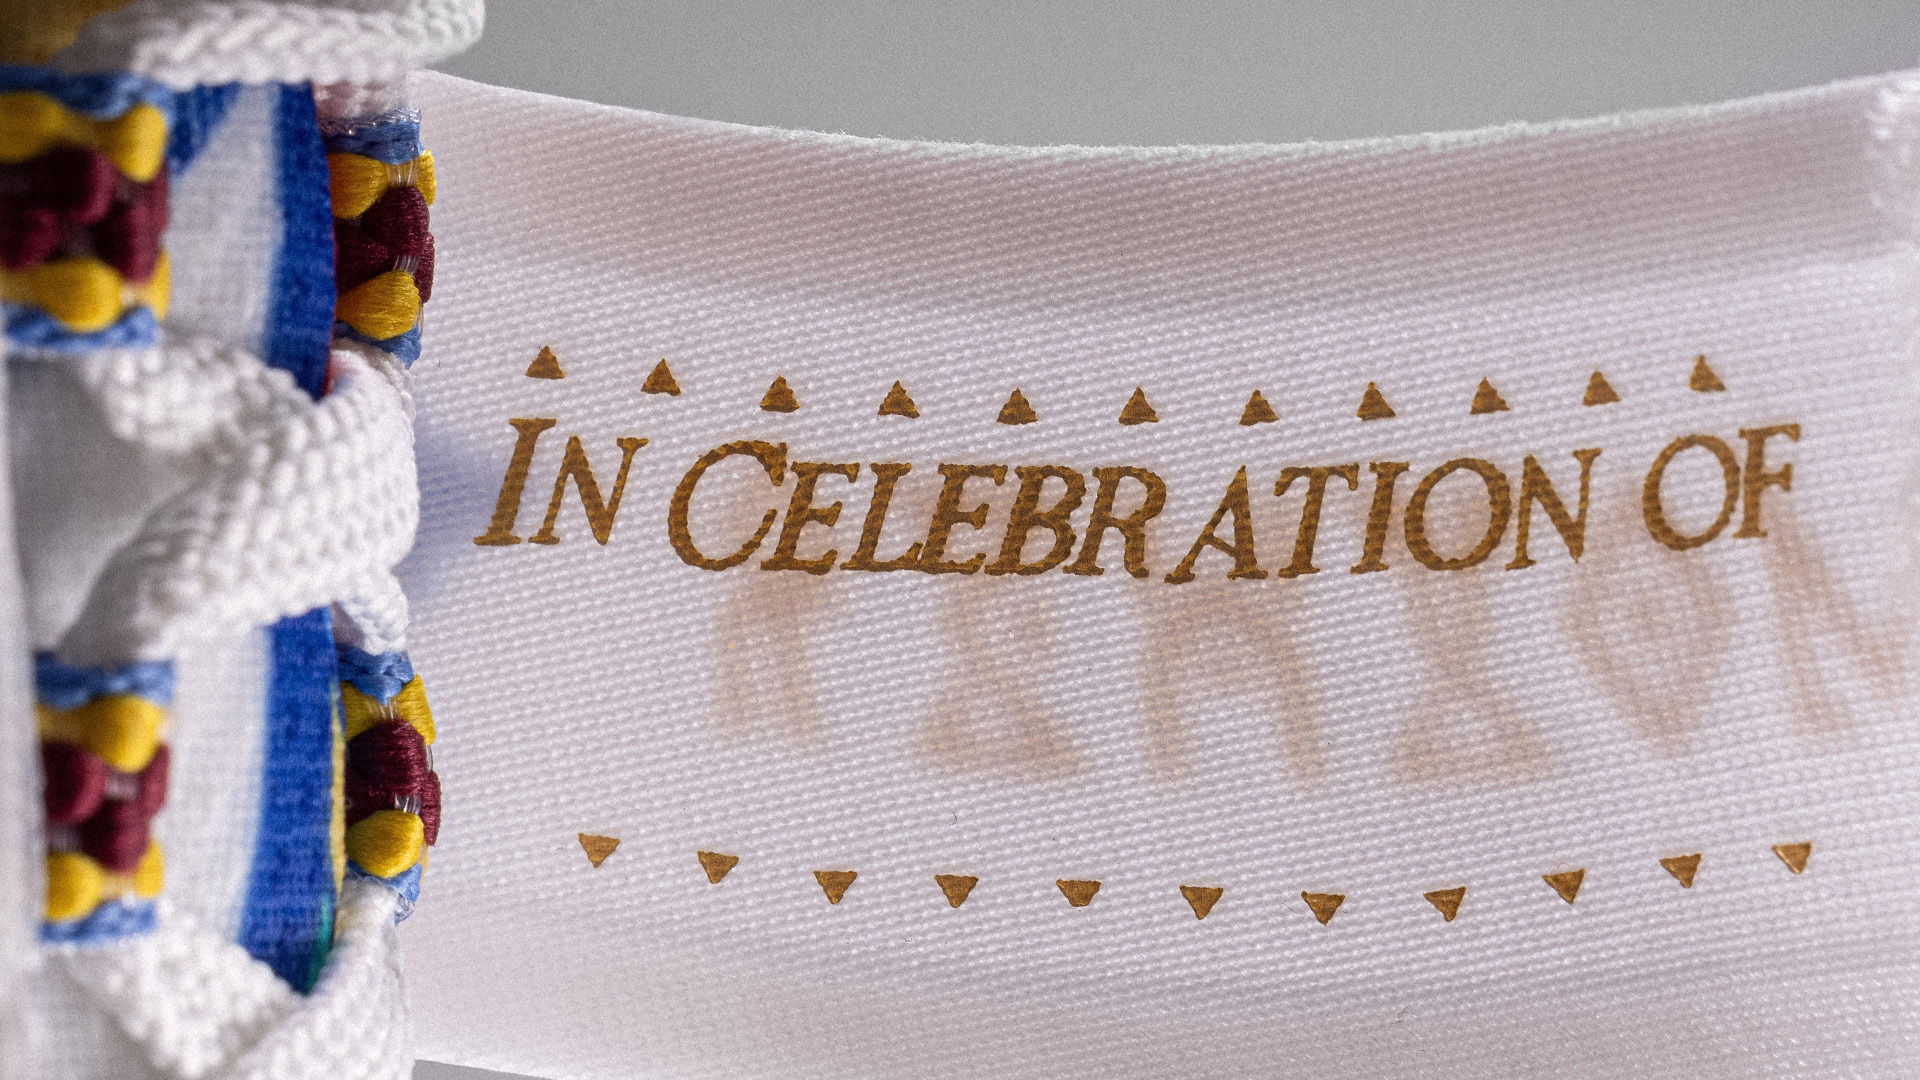 Sneaker close-up with &quot;IN CELEBRATION OF&quot; text and decorative stitching